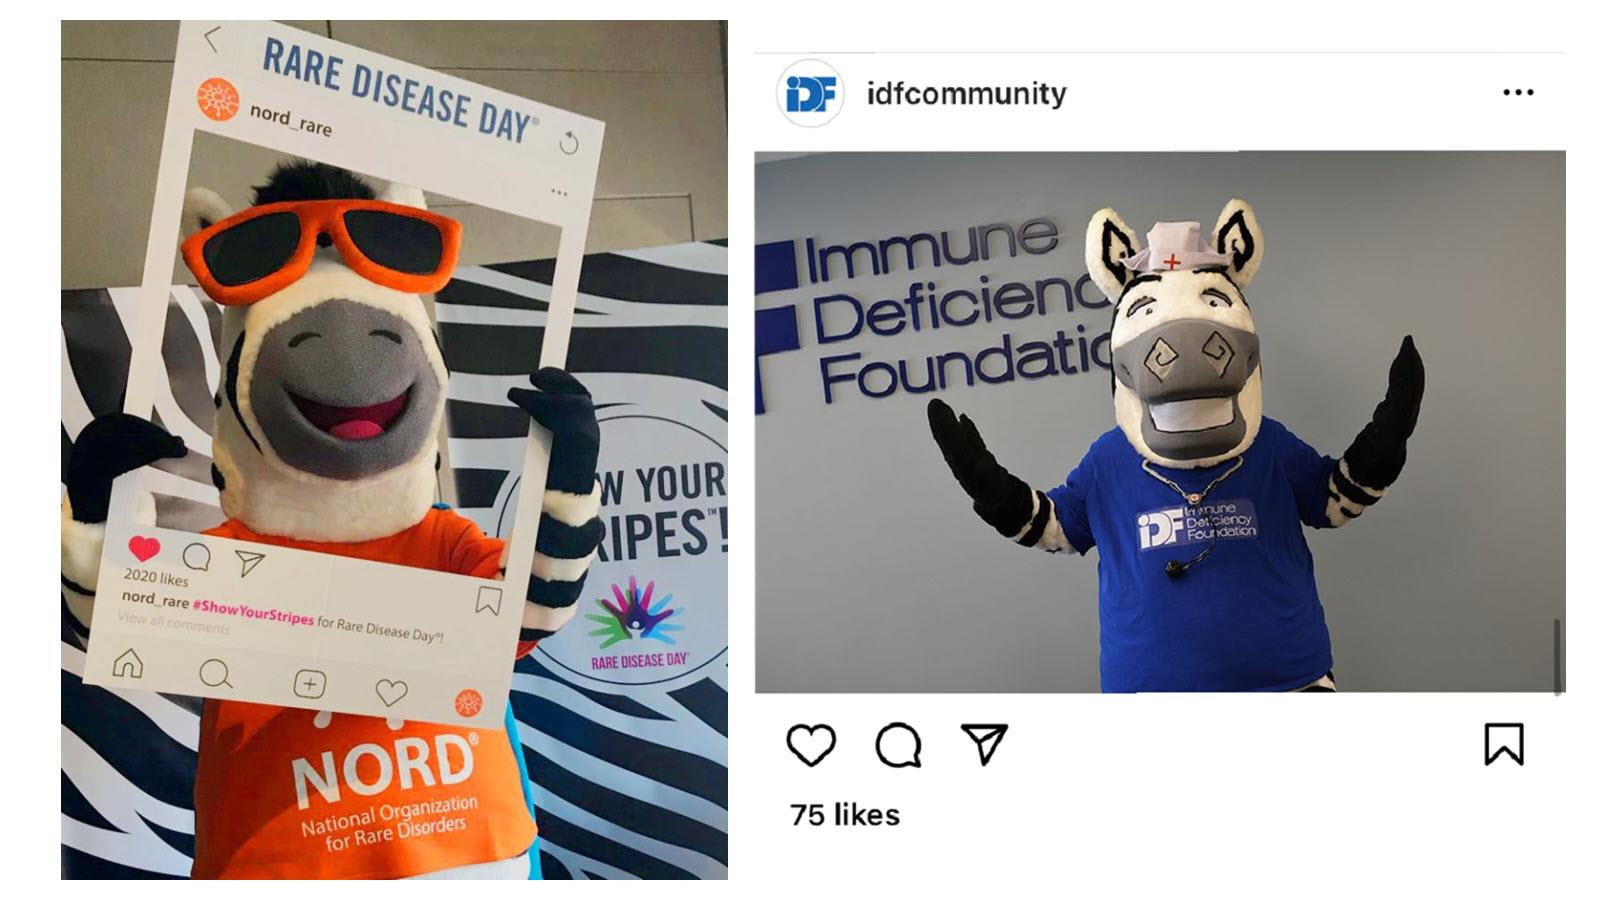 Two zebra mascots, including one in sunglasses representing the National Organization for Rare Disorders and the Immune Deficiency Foundation